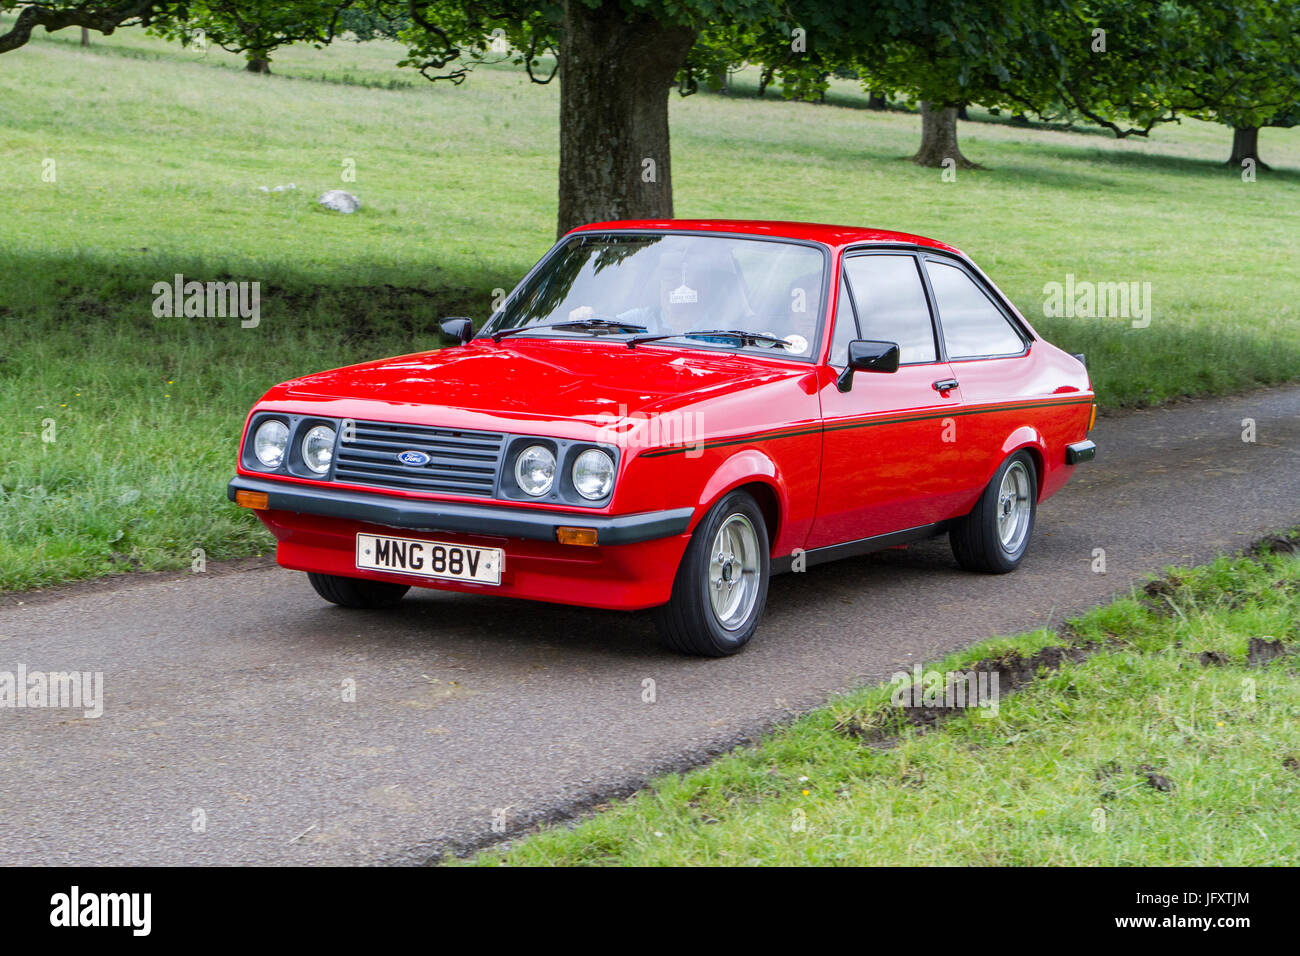 MNG88V 1980 red Ford Escort RS Custom at Mark Woodward Classic Events, classic cars, classic cars, cherished, veteran, old timer, vintage vehicles. Stock Photo